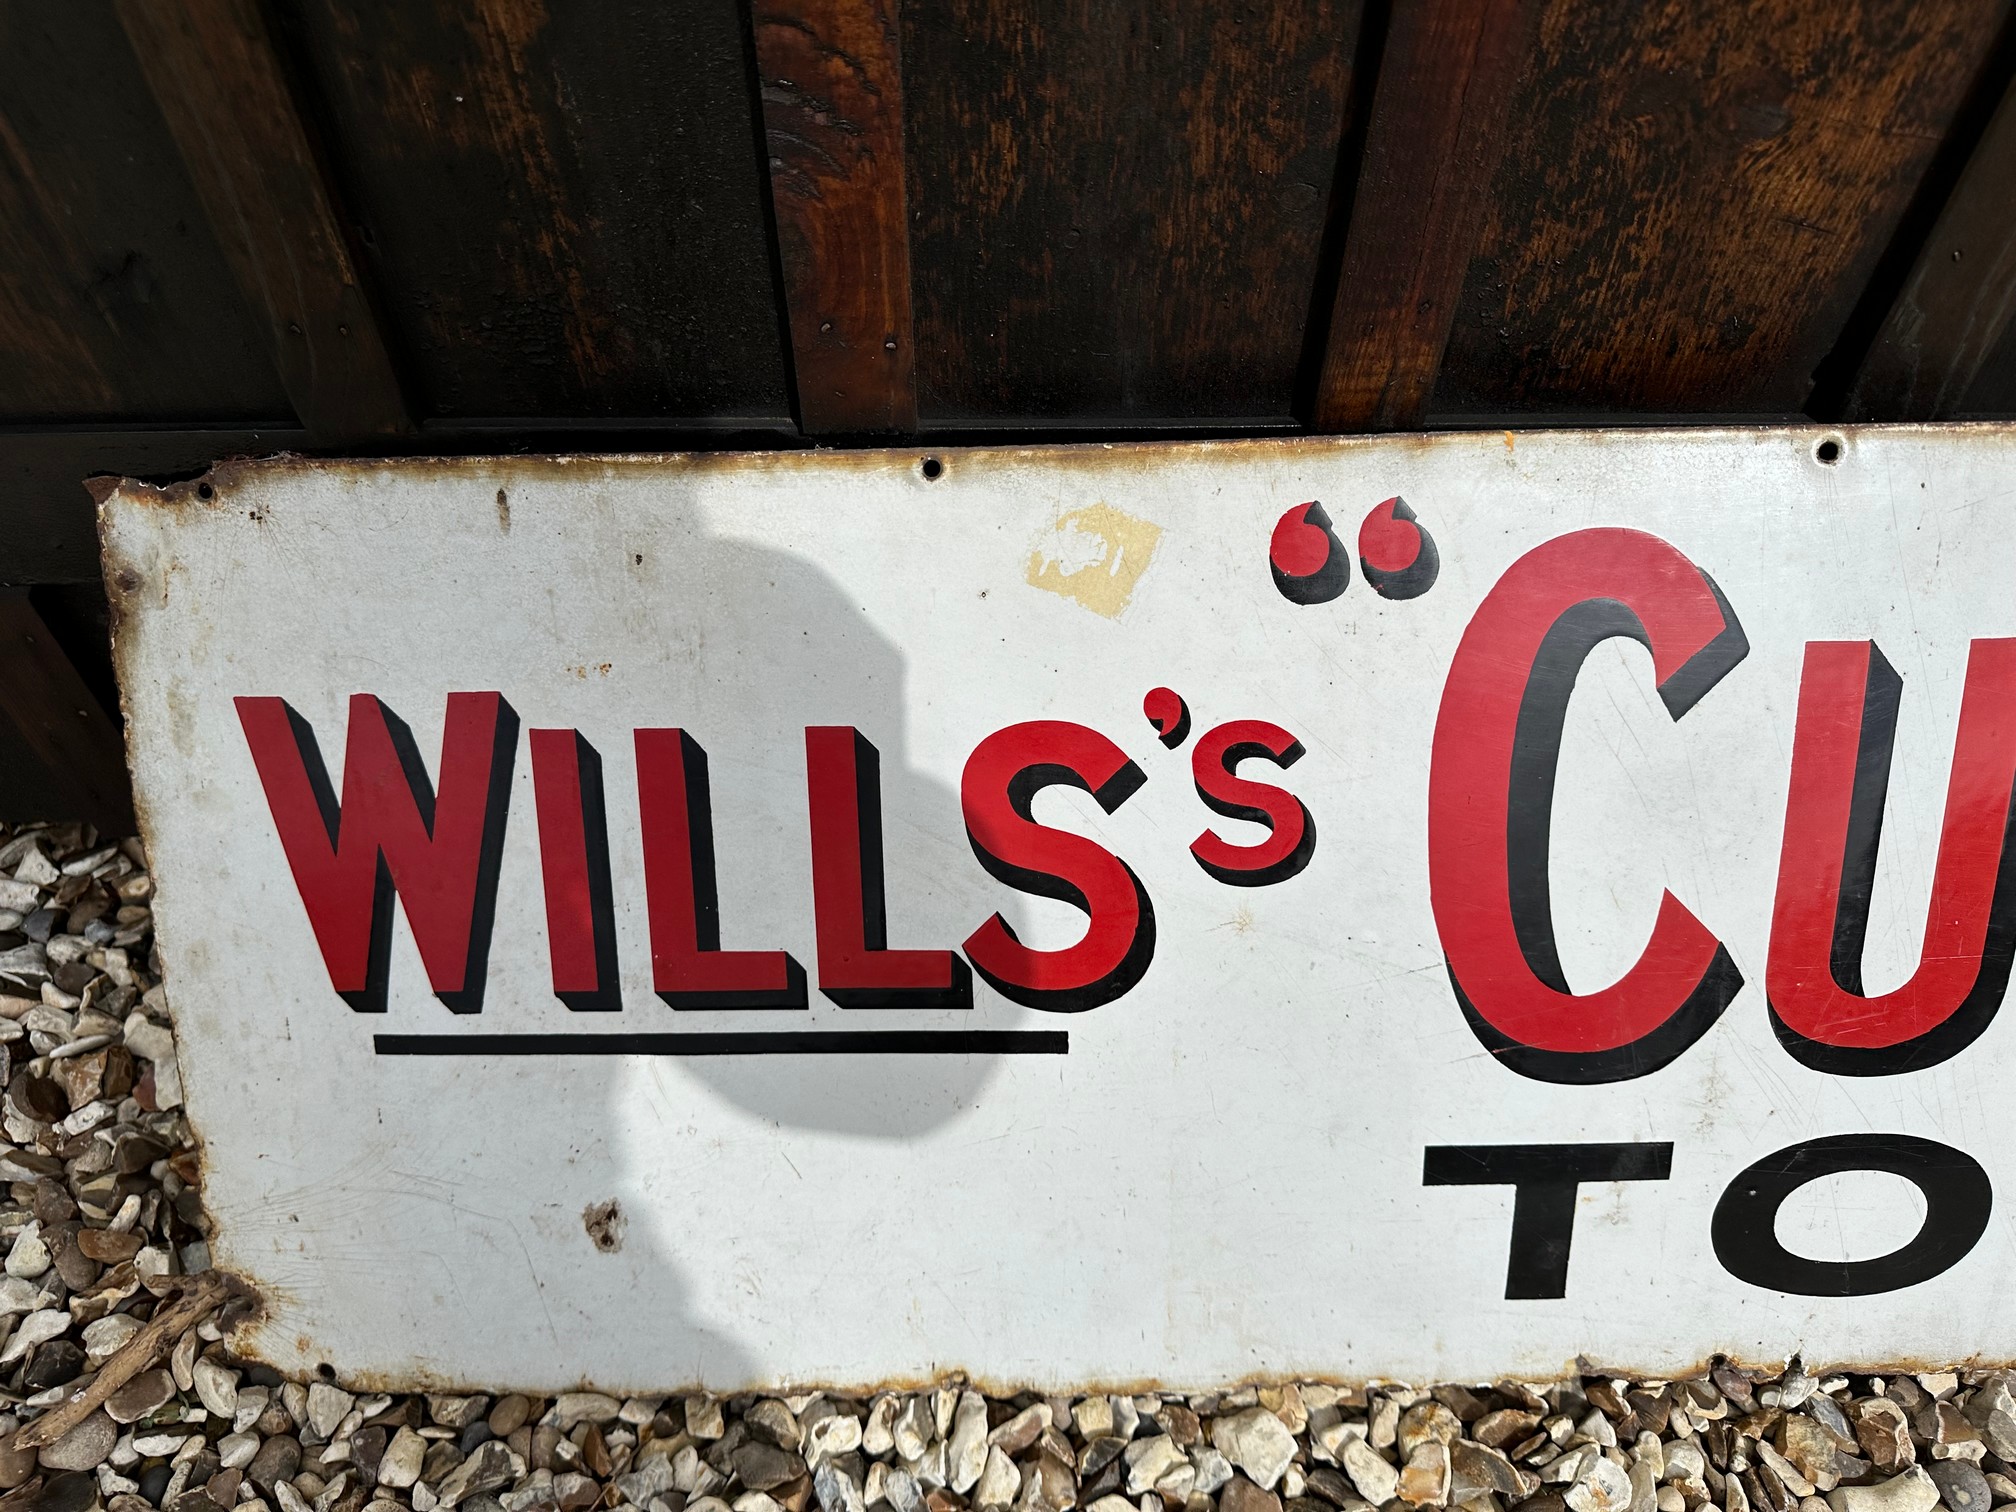 A Wills's "Cut Golden Bar" Tobacco enamel advertising sign, 72 x 15". - Image 3 of 5